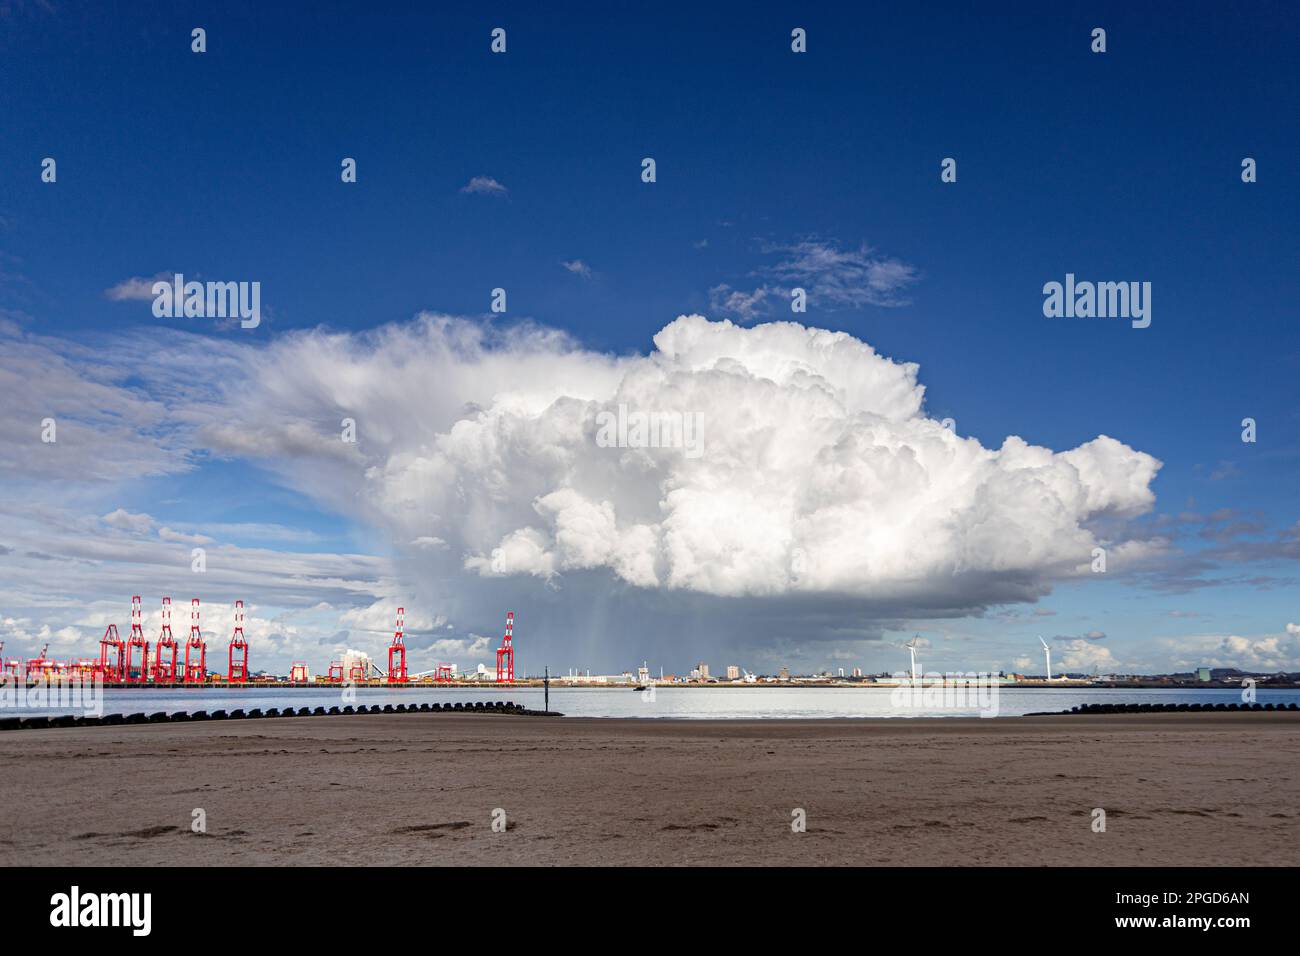 Storm cloud over Liverpool Container Dock 2, Merseyside, England Stock Photo